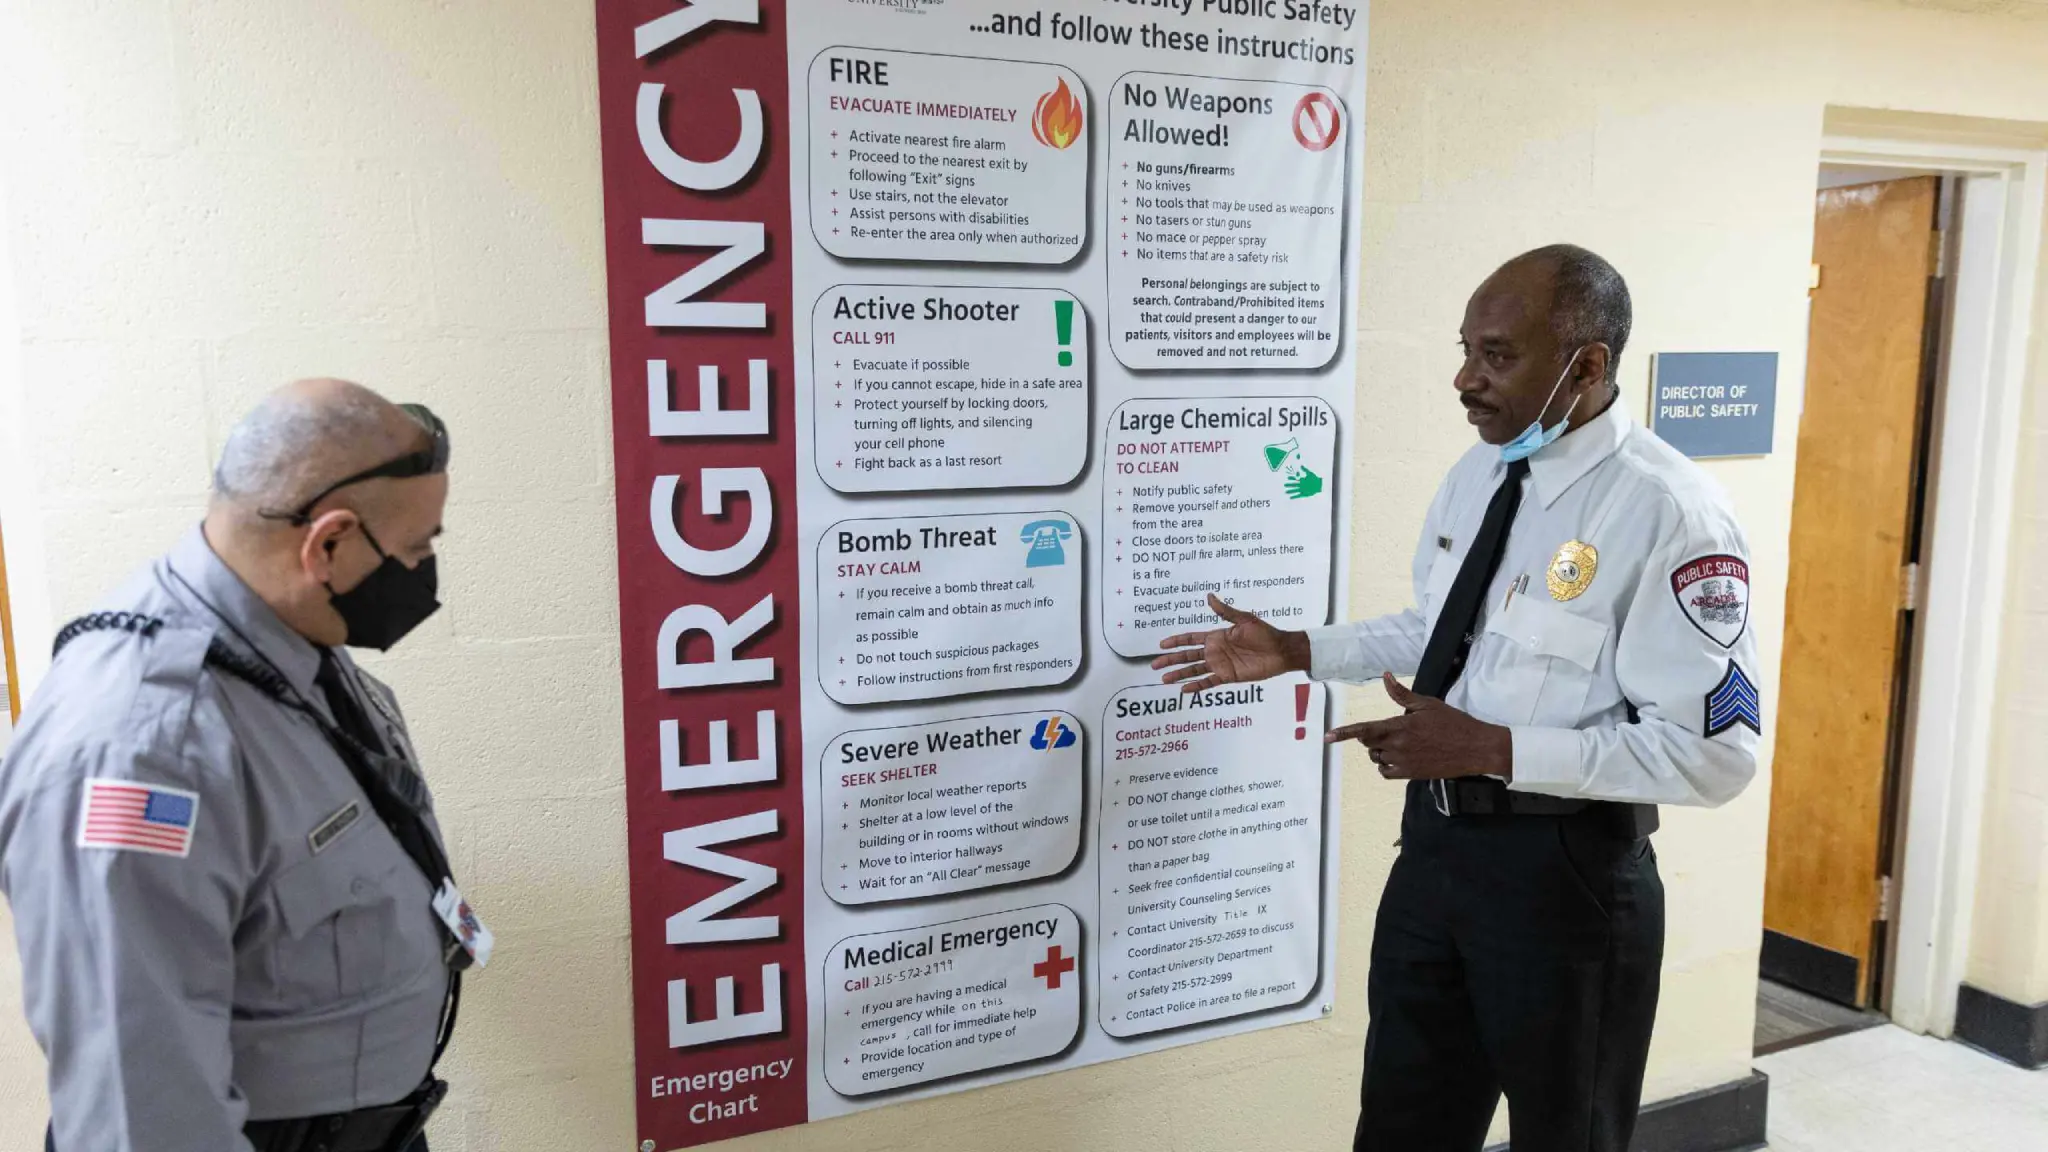 Arcadia Patrol officers stand next to an Emergency infographic during a training session